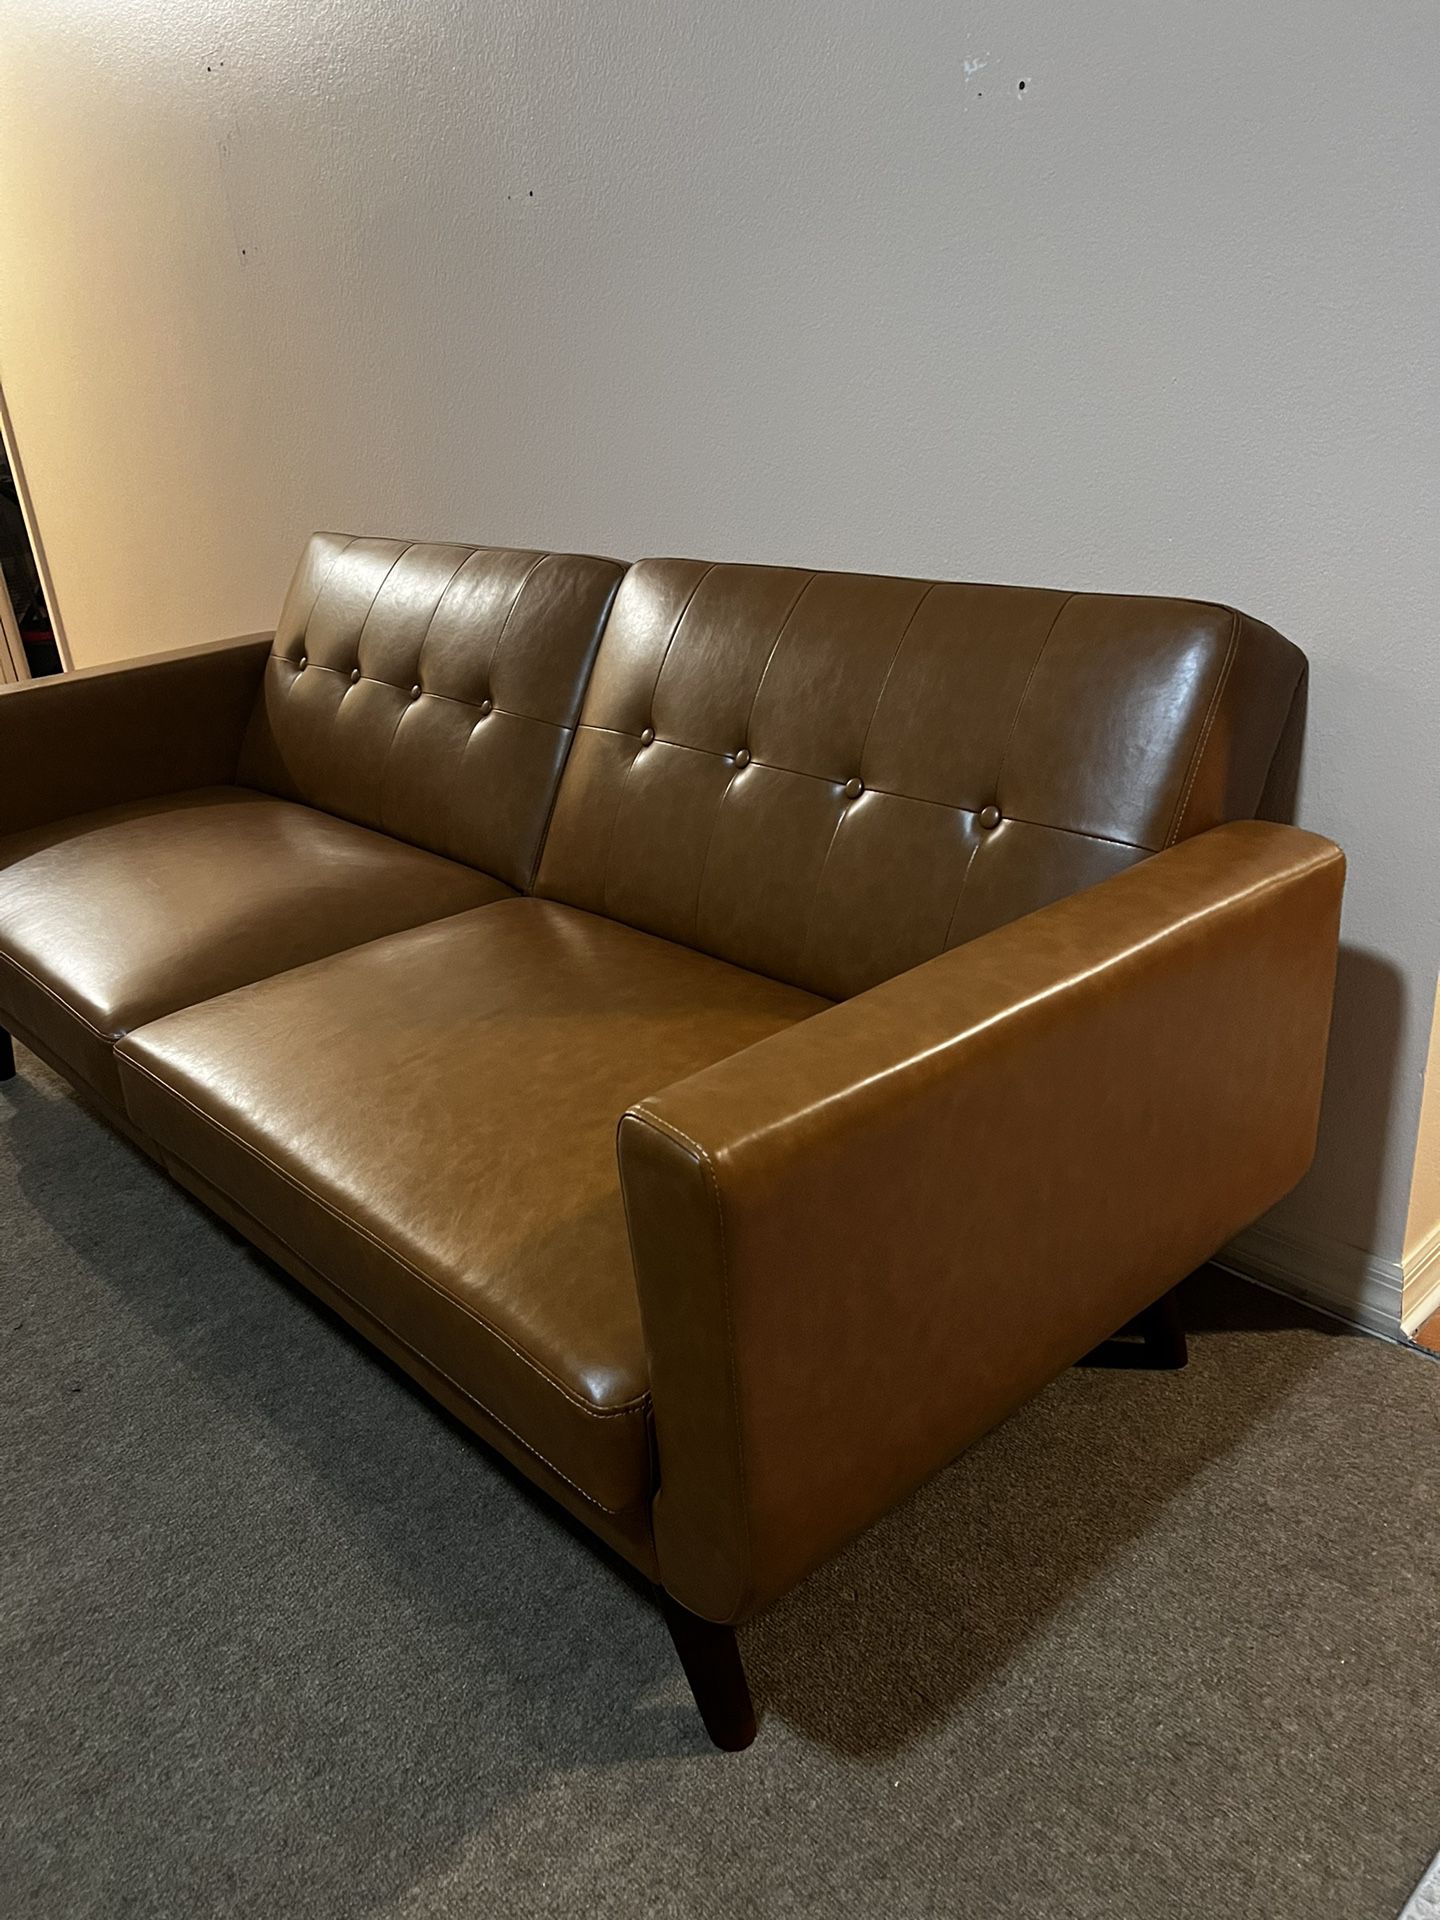  Brand New  Couch Sofa Futon Sleeper Flux Leather 